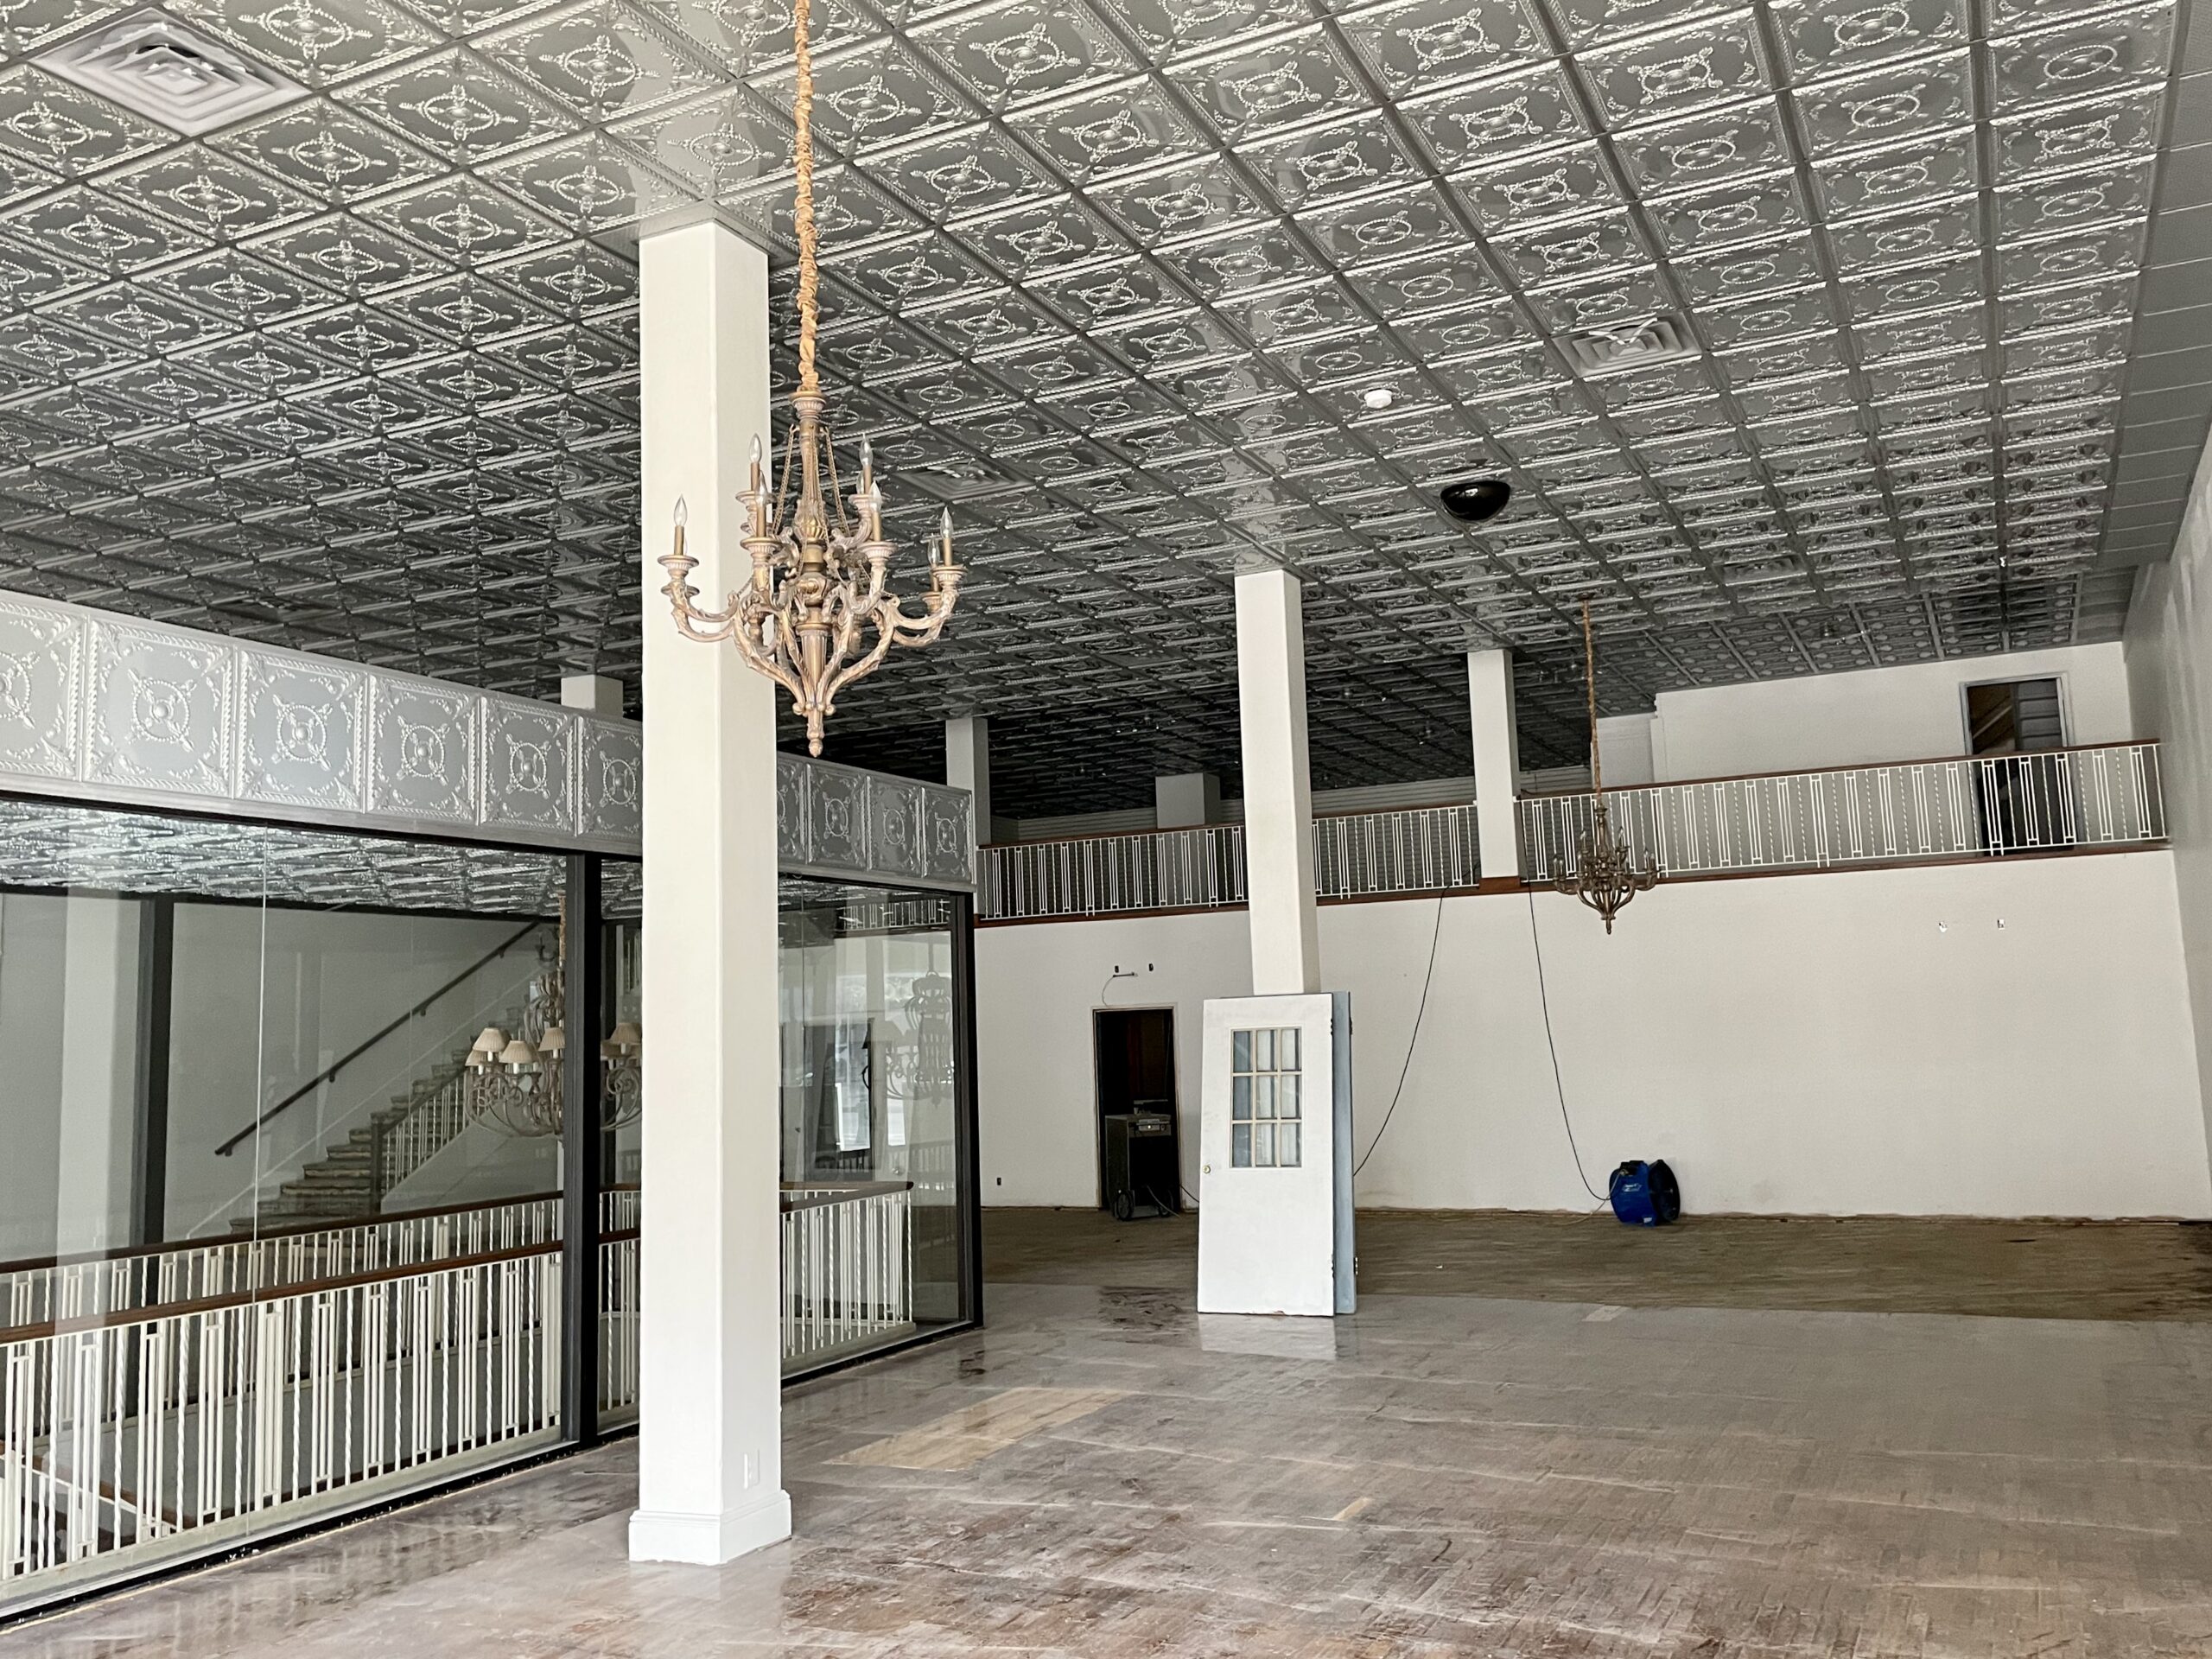 Building interior with tin ceilings and chandeliers.